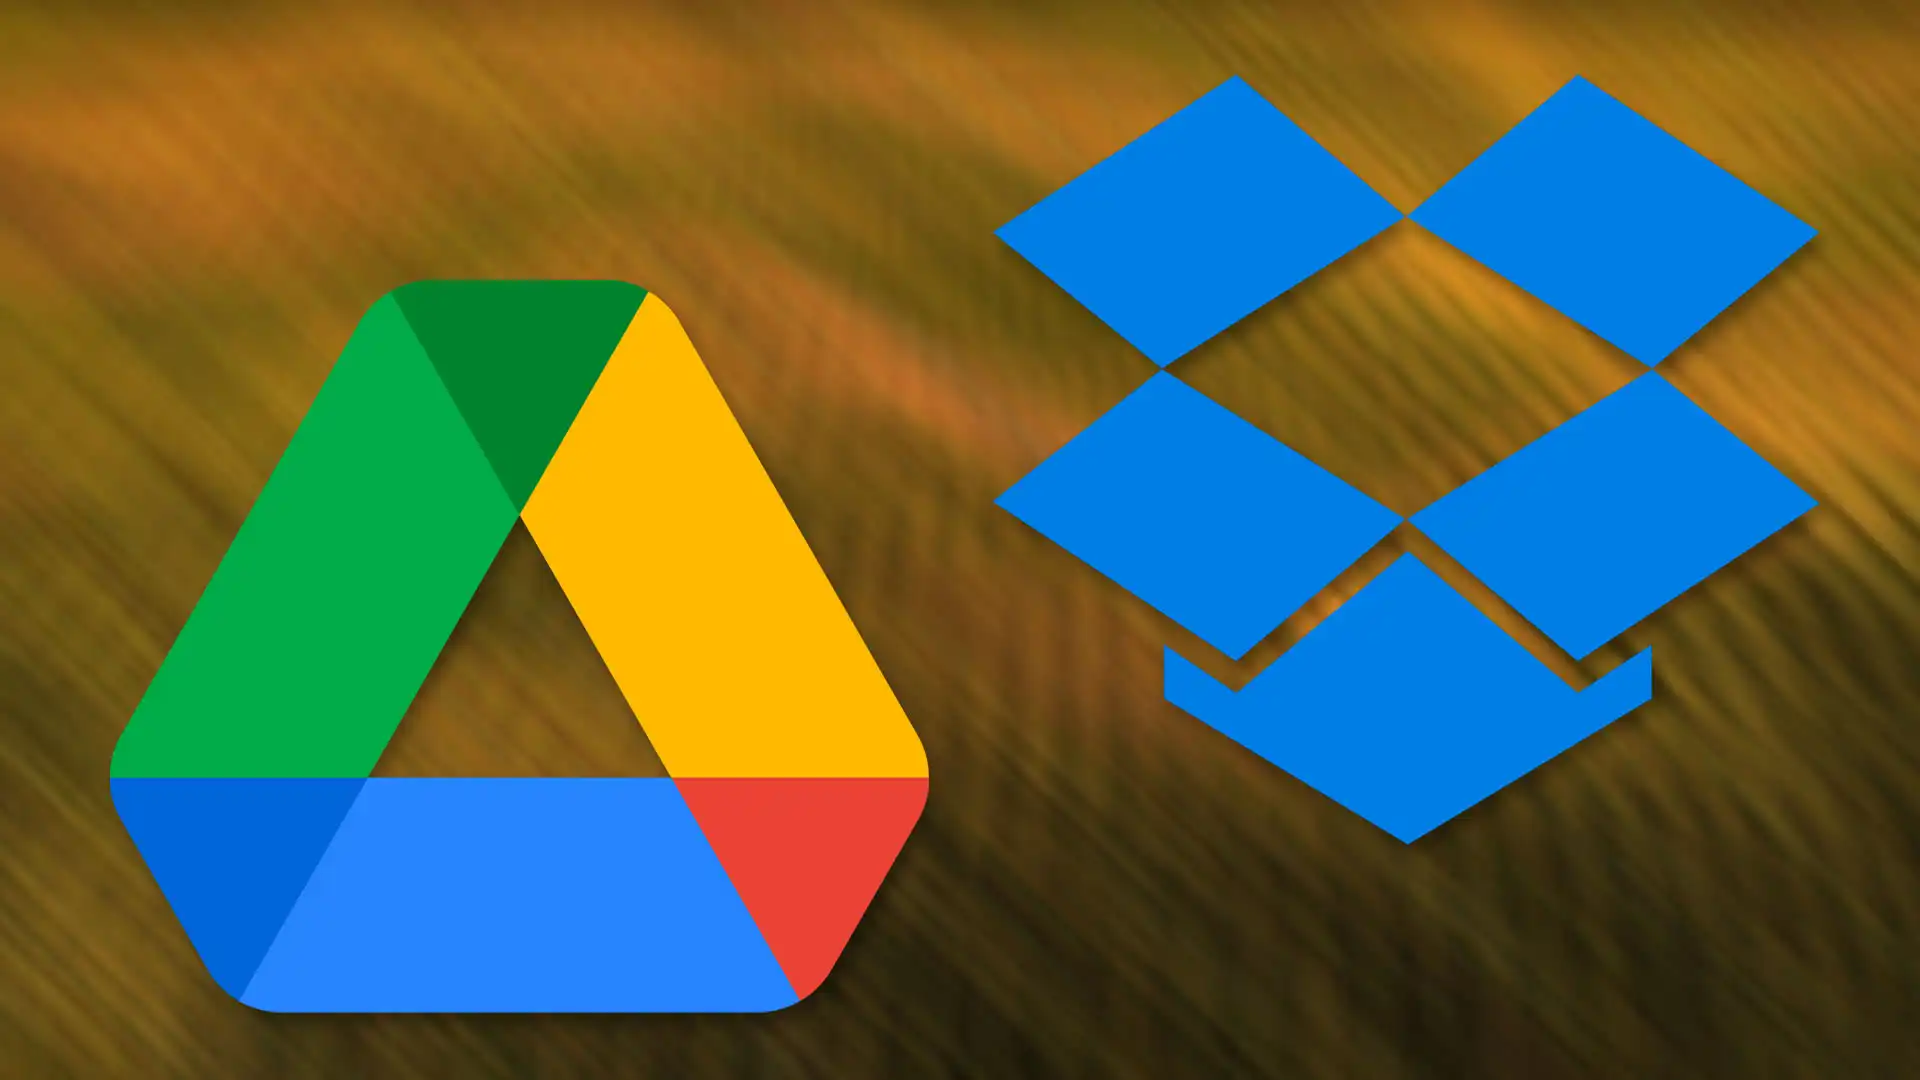 Google Drive and Dropbox integration will soon change a bit - instead of files, you'll see shortcuts with links